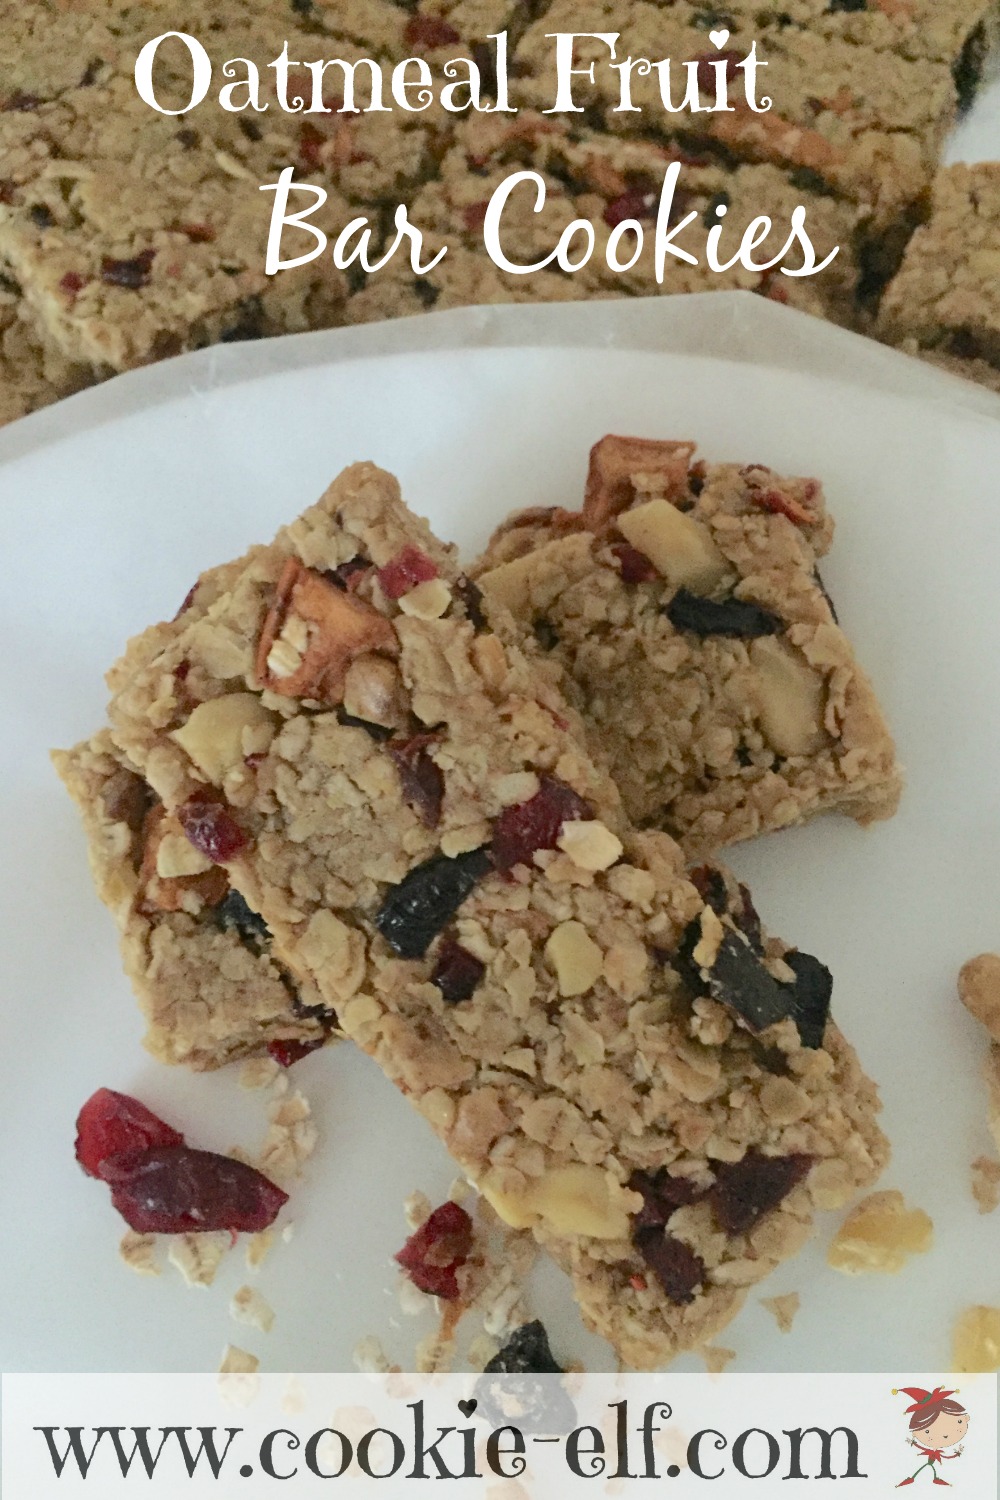 Oatmeal Fruit Bar Cookies with The Cookie Elf